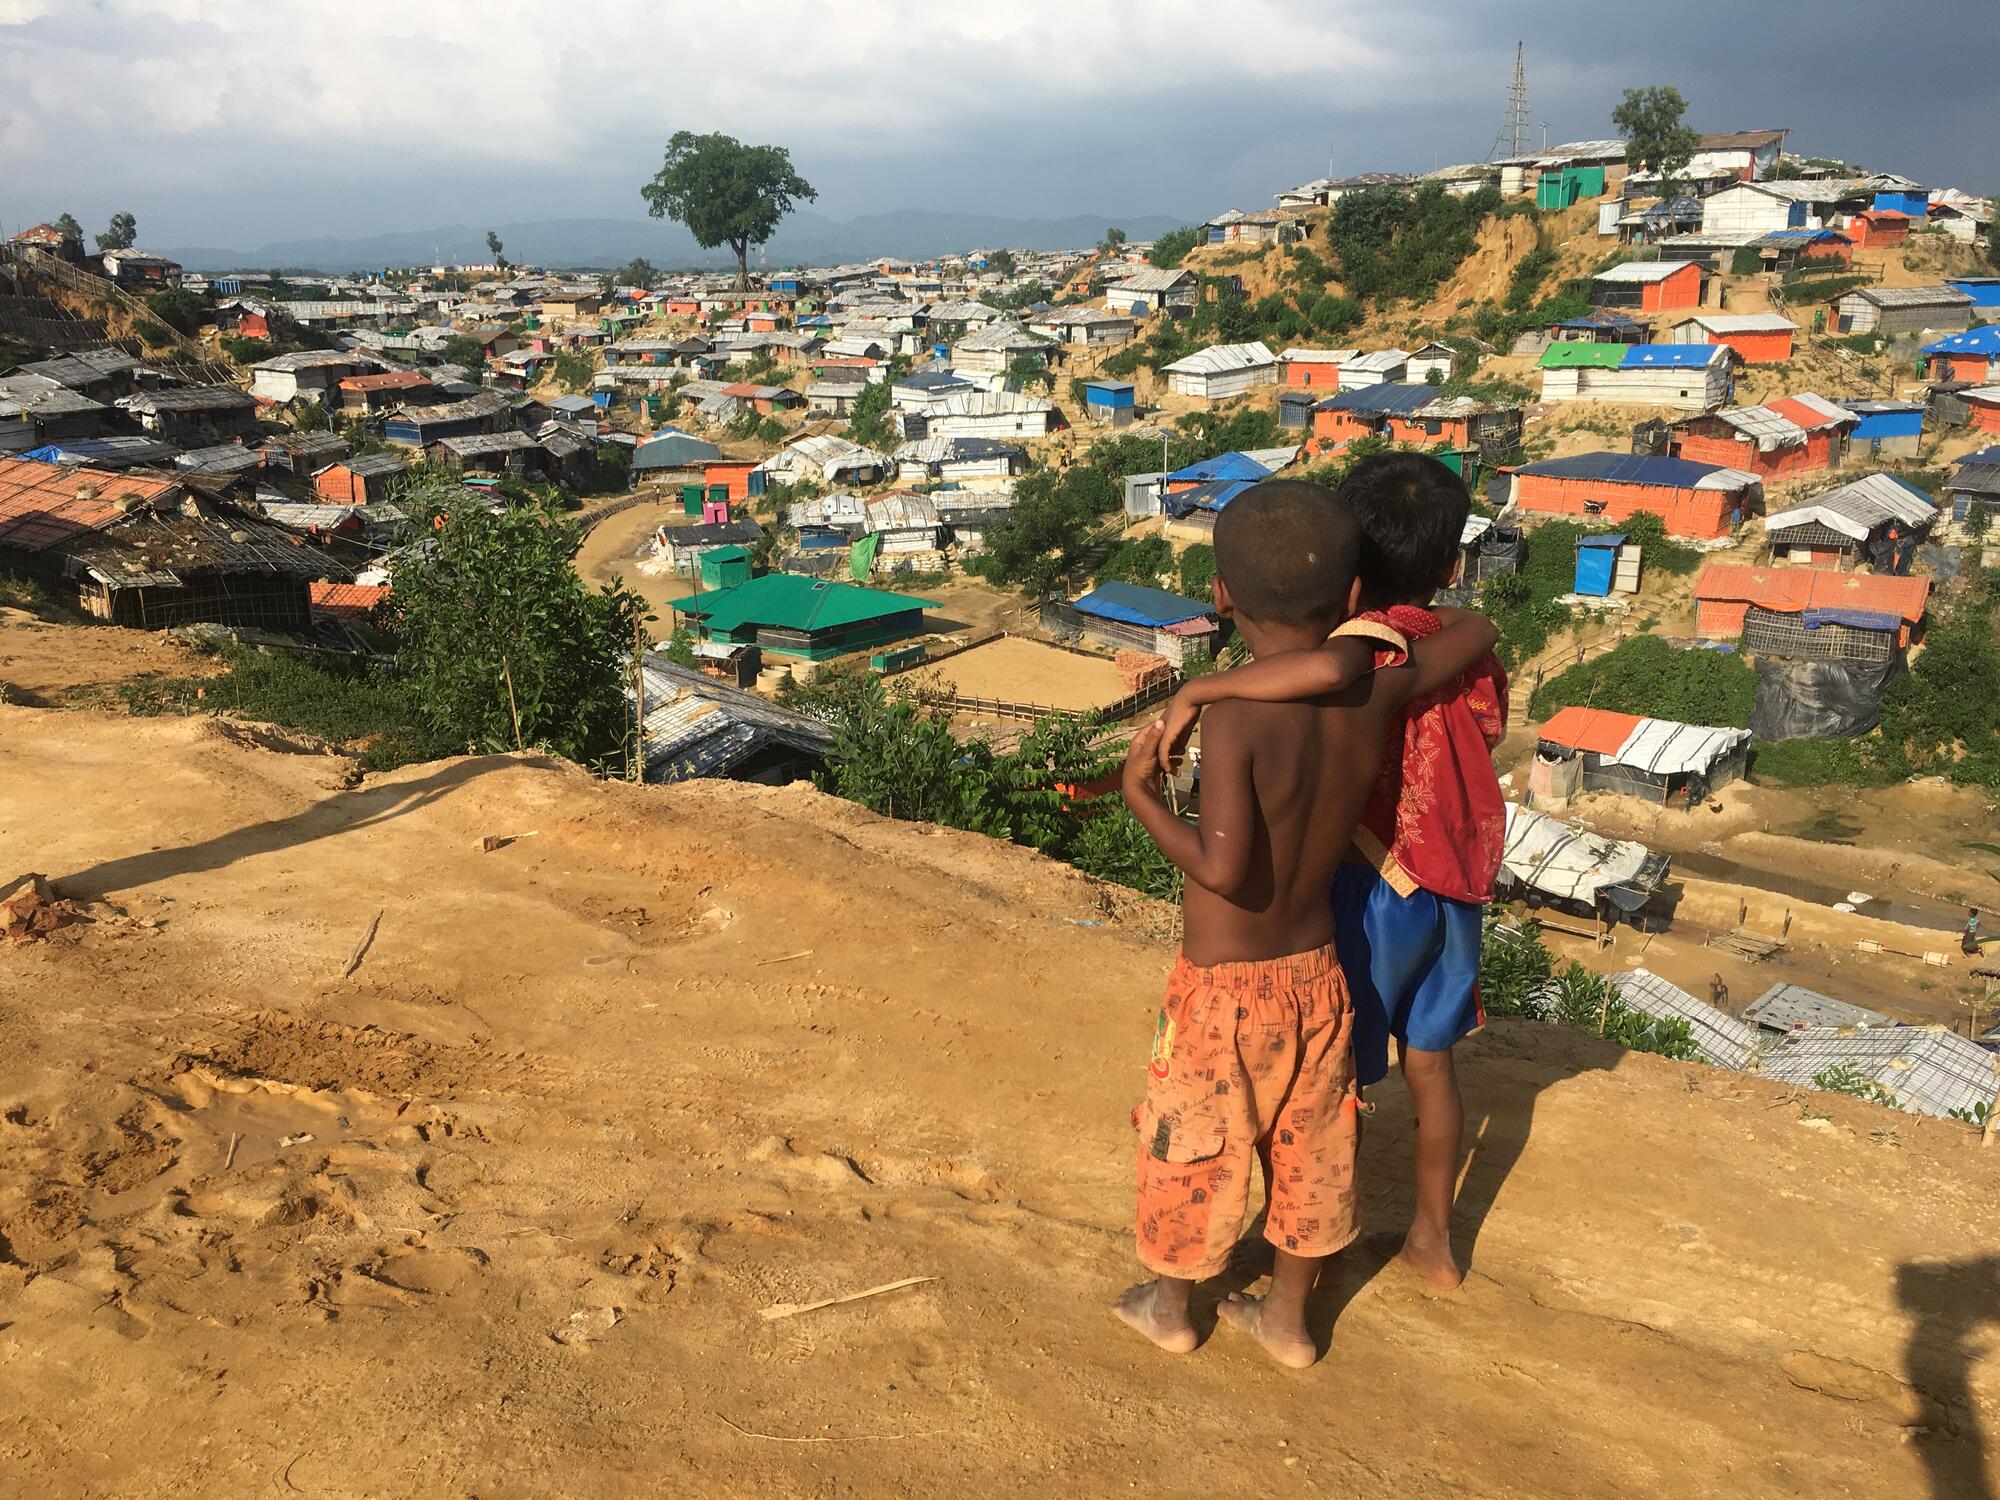 Children look over the refugee camp in Bangladesh